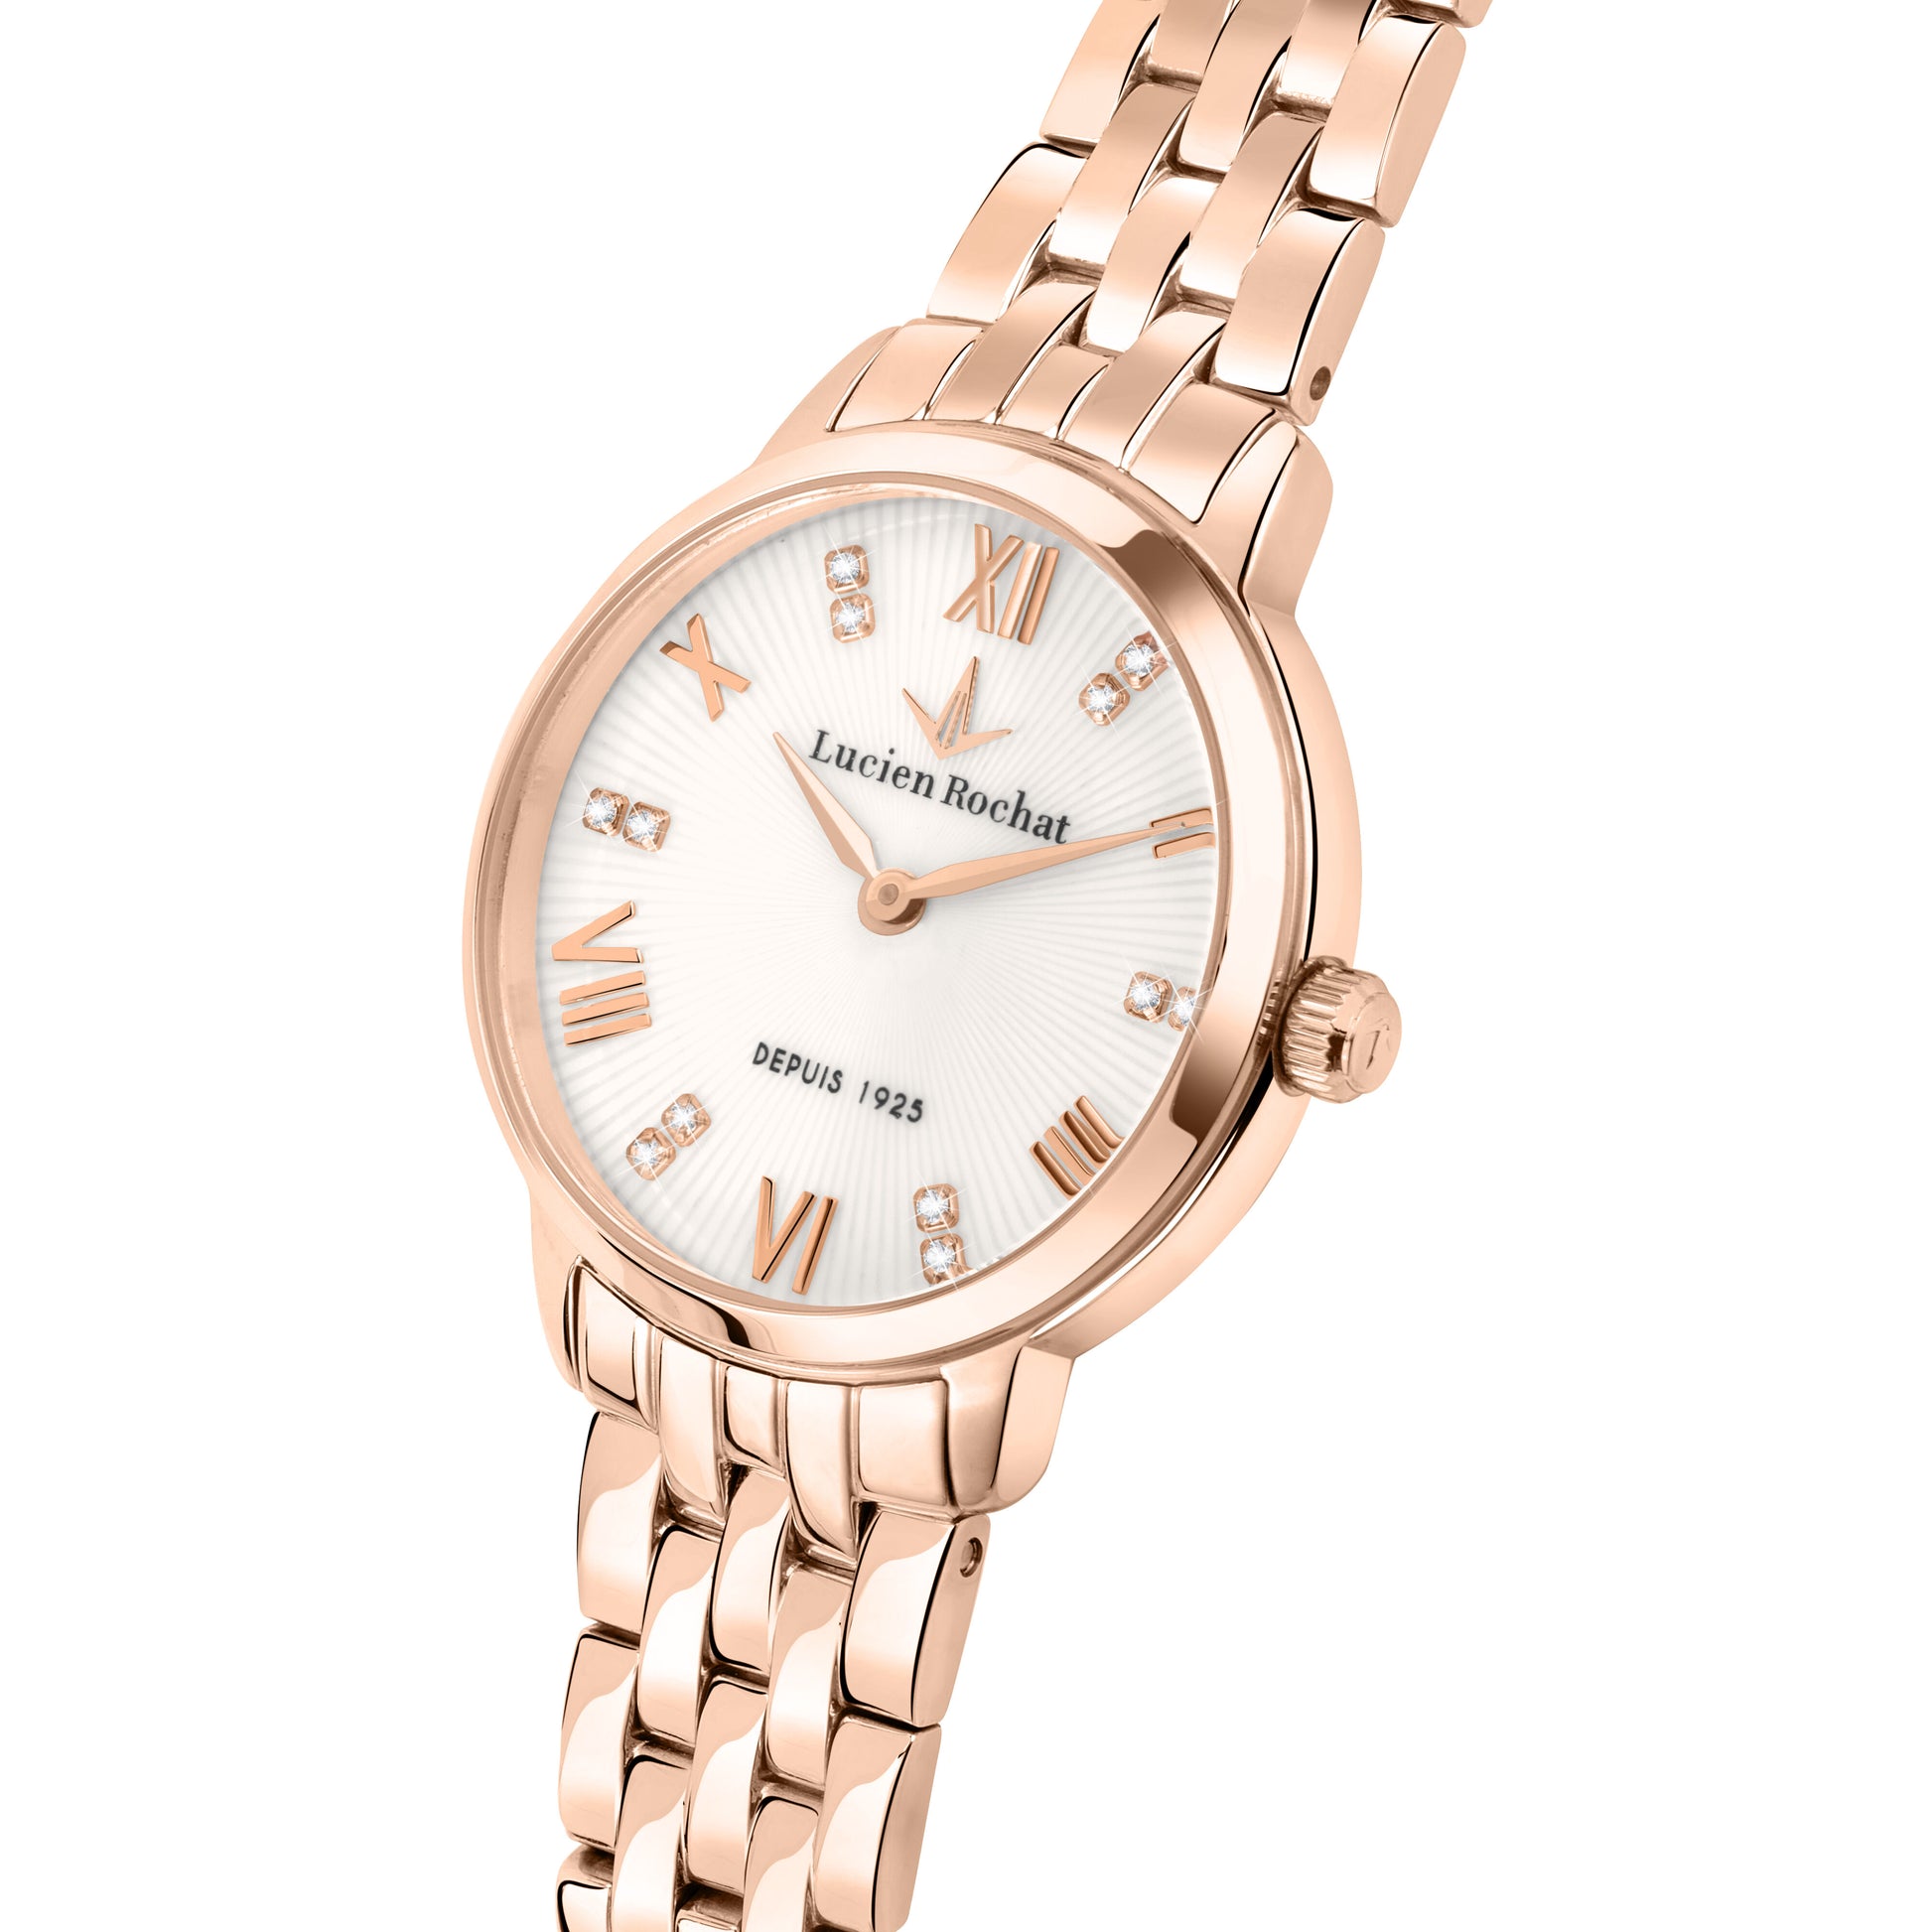 orologio donna lucien rochat charme r0453115510